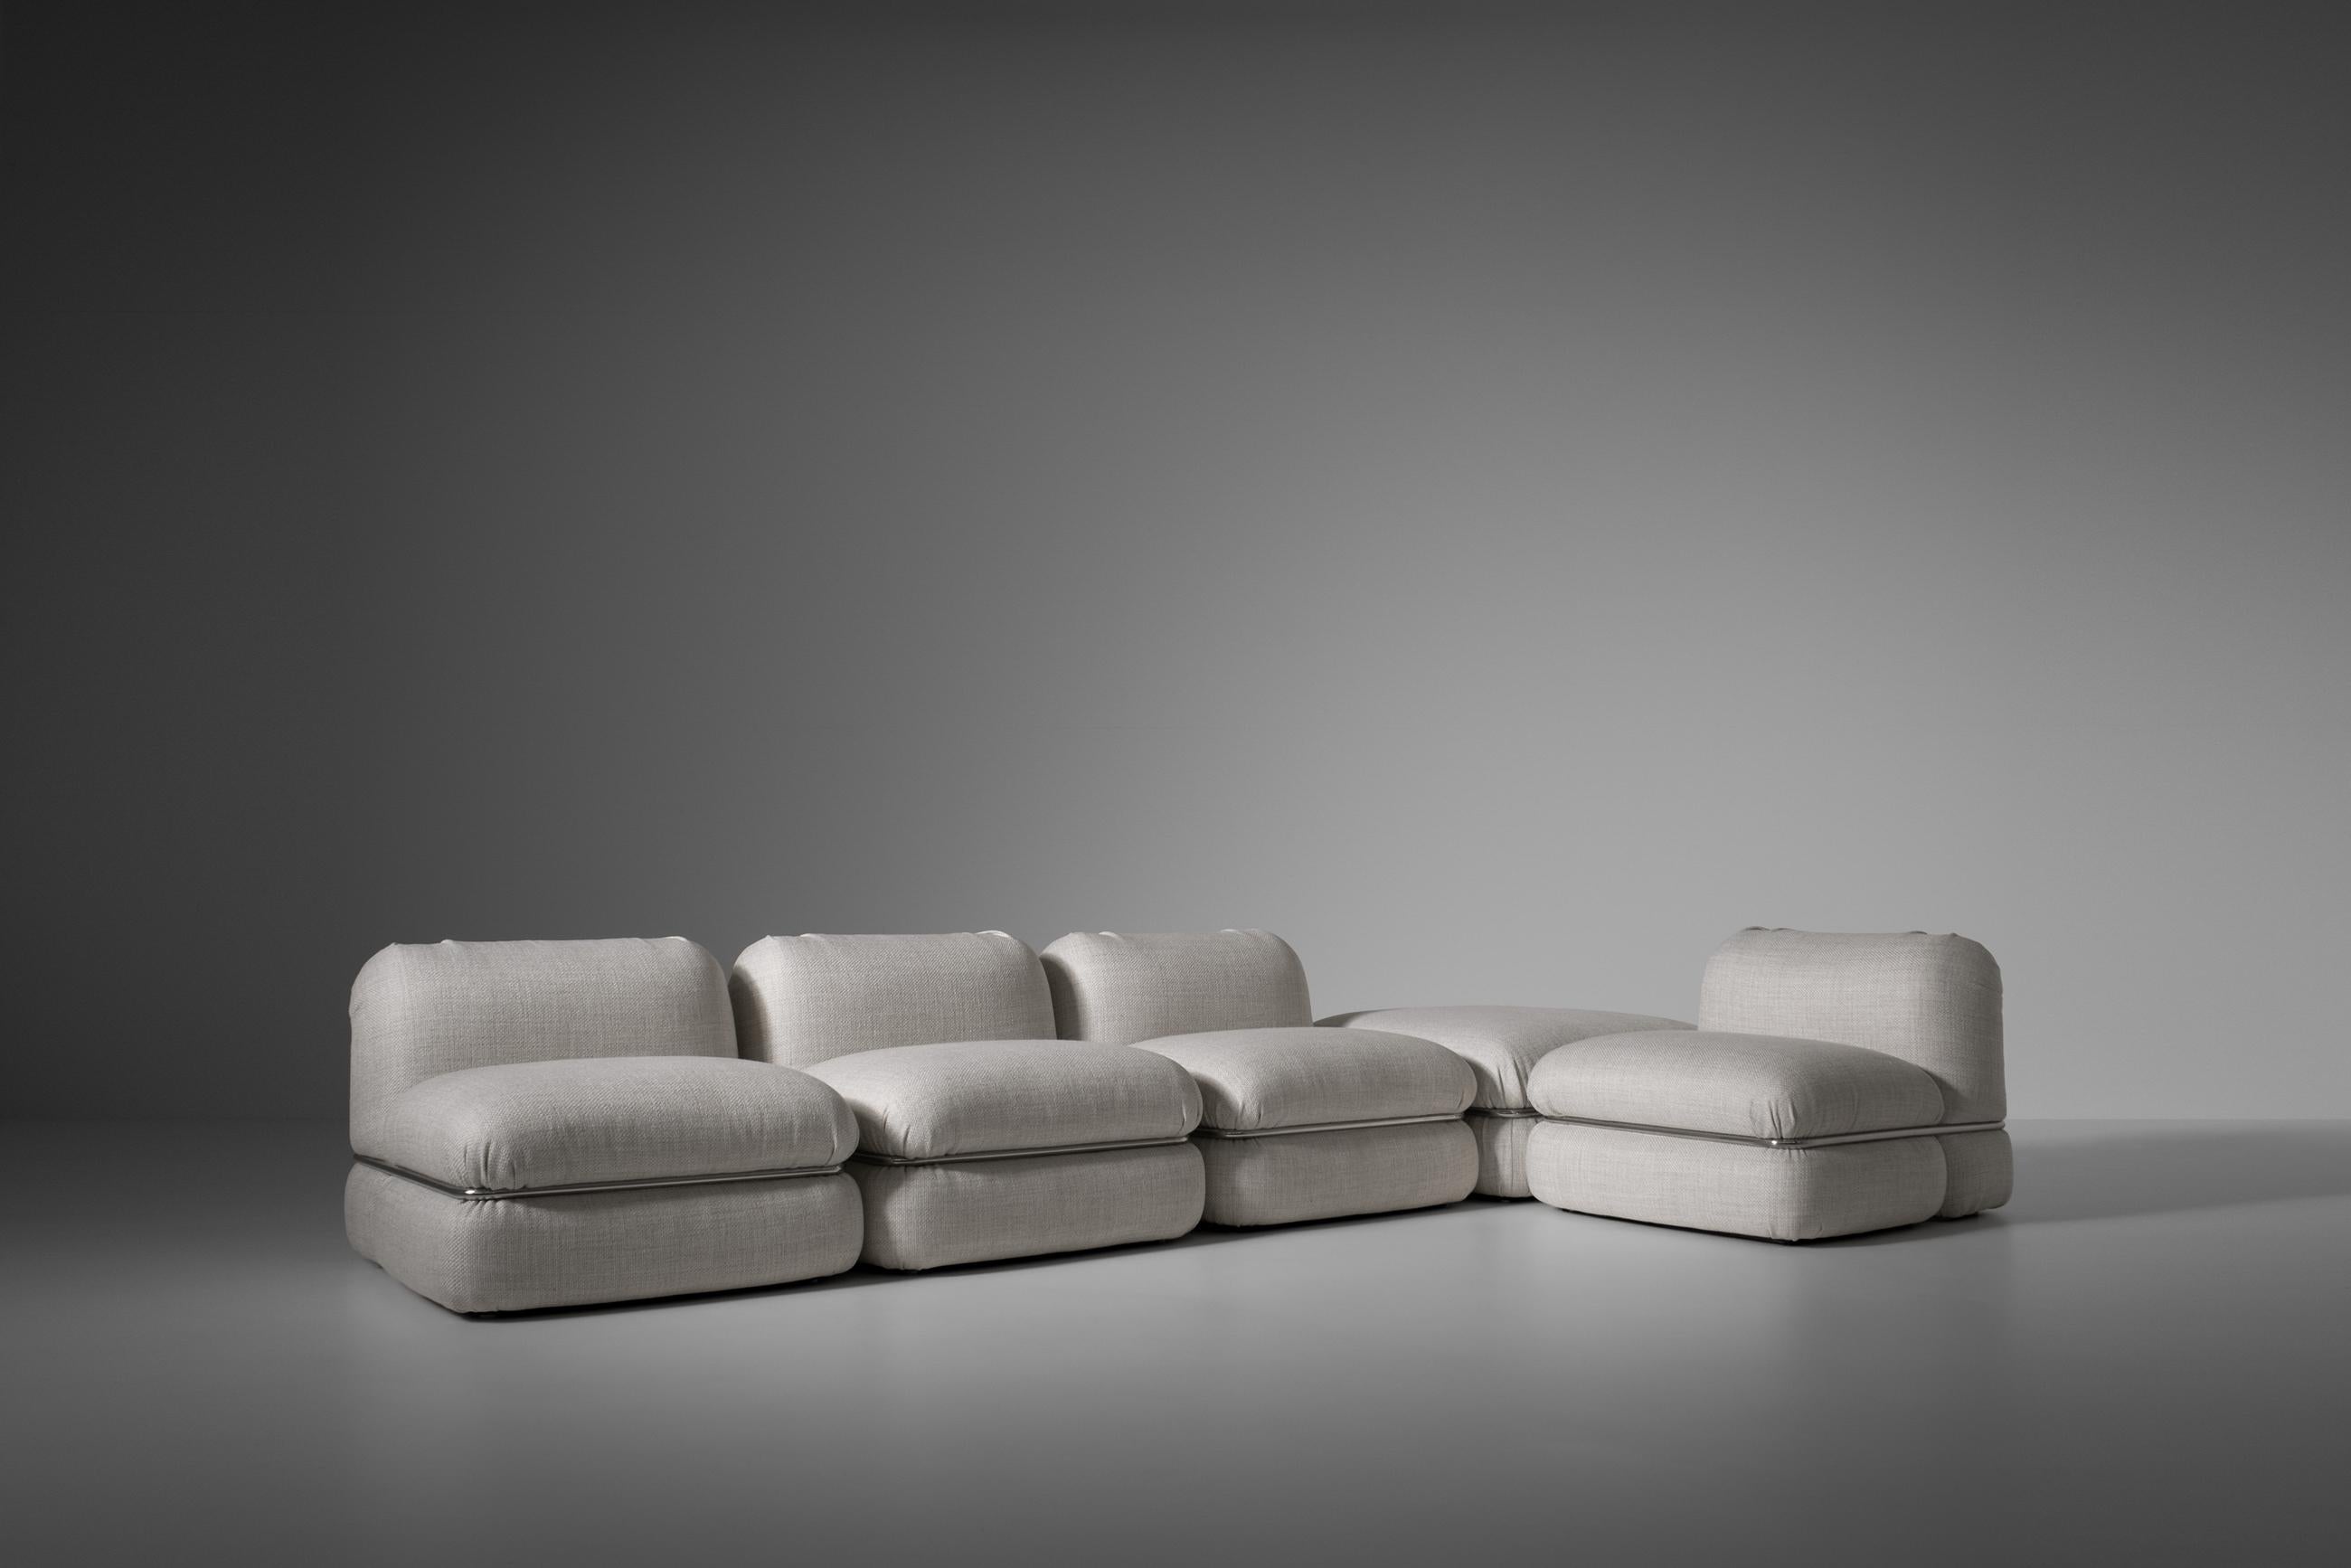 Modular sofa by Rodolfo Bonetto for Tecnosalotto, Italy 1960s. Very comfortable sofa consisting out of four square modular elements and a pouf. The cushions are held together by chromed metal clamps. The sofa is reupholstered in an off white / beige